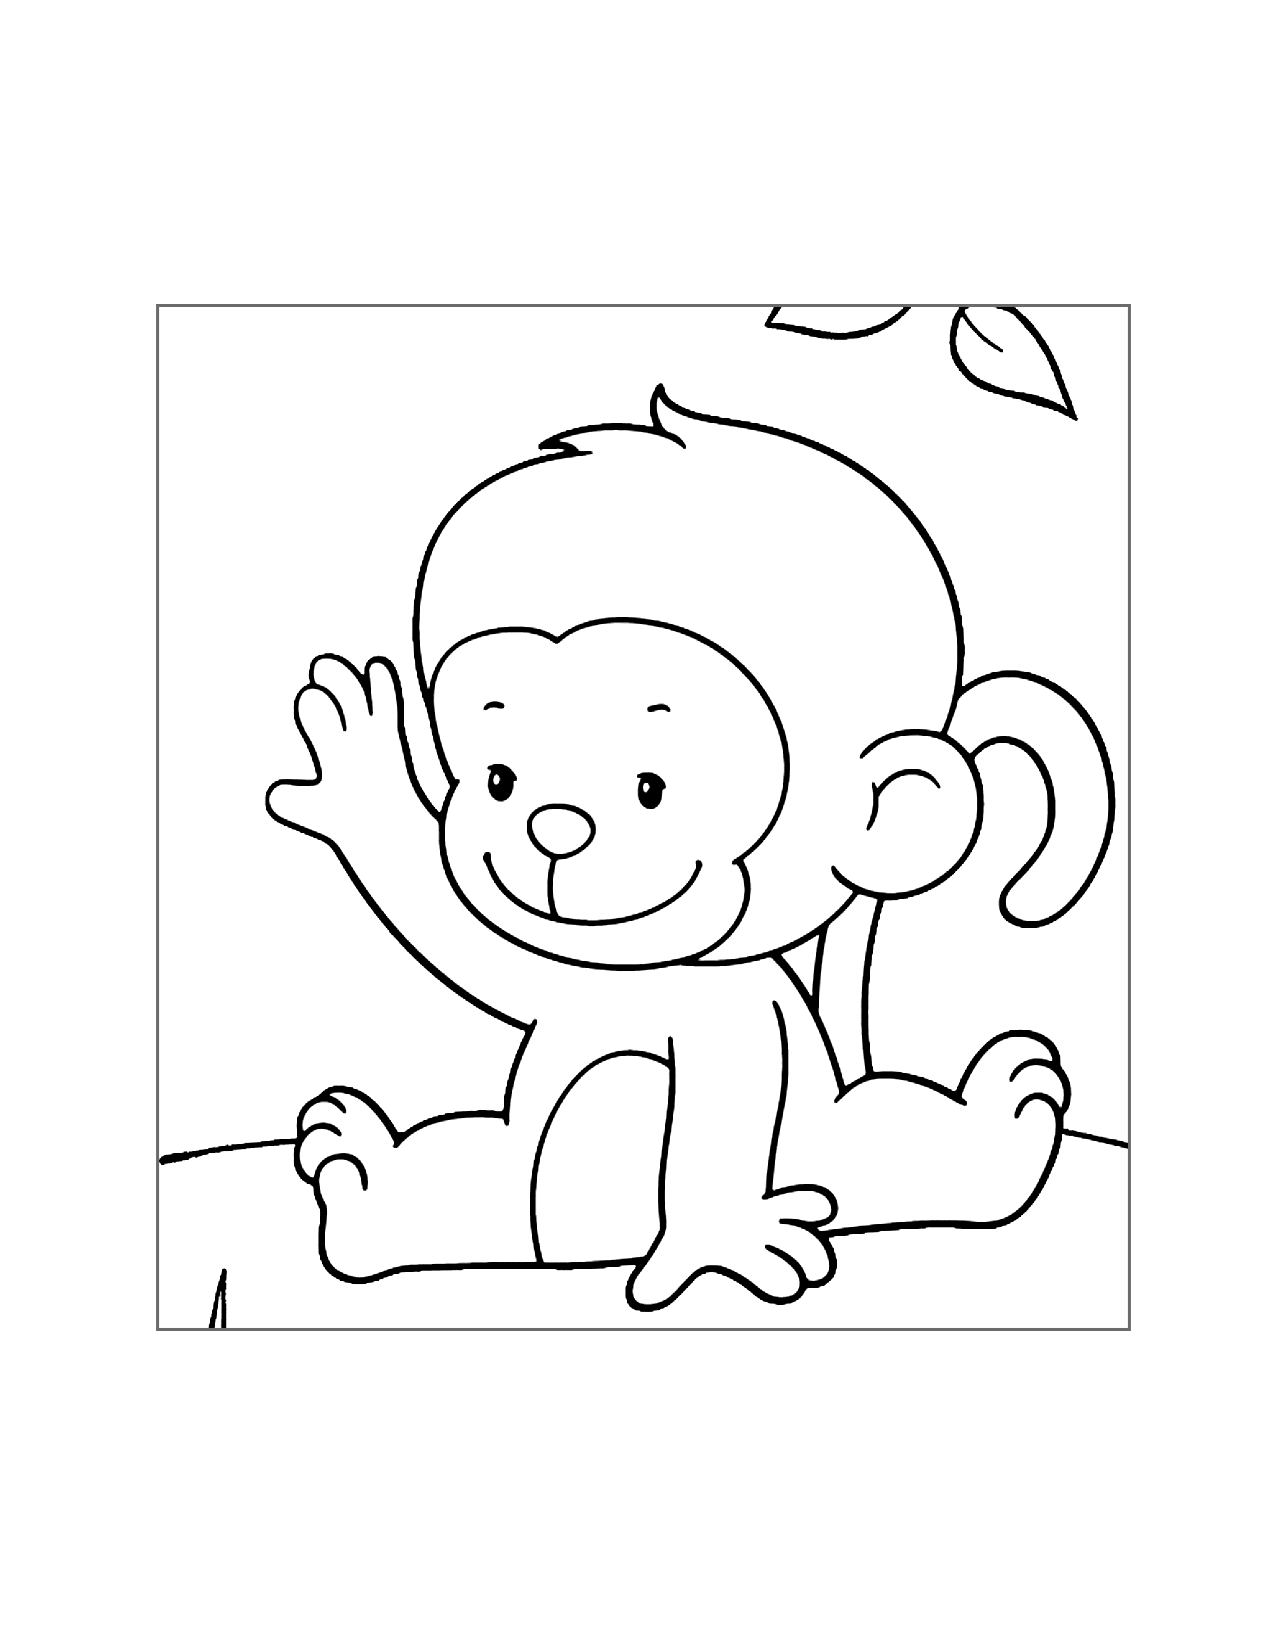 Cartoon Baby Monkey Coloring Page